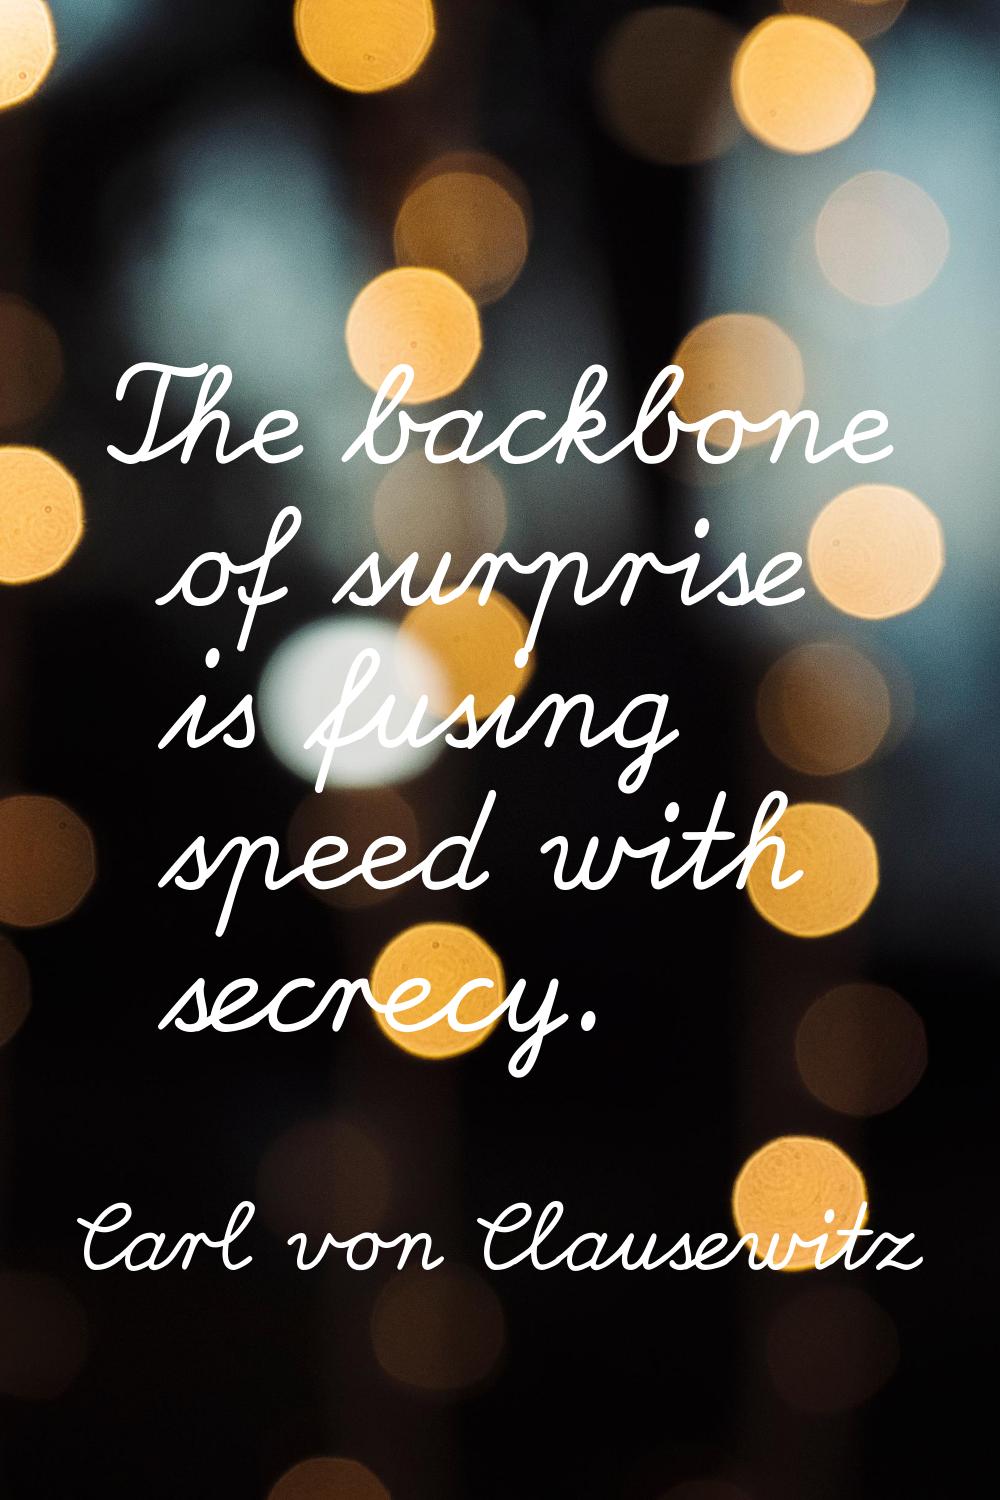 The backbone of surprise is fusing speed with secrecy.